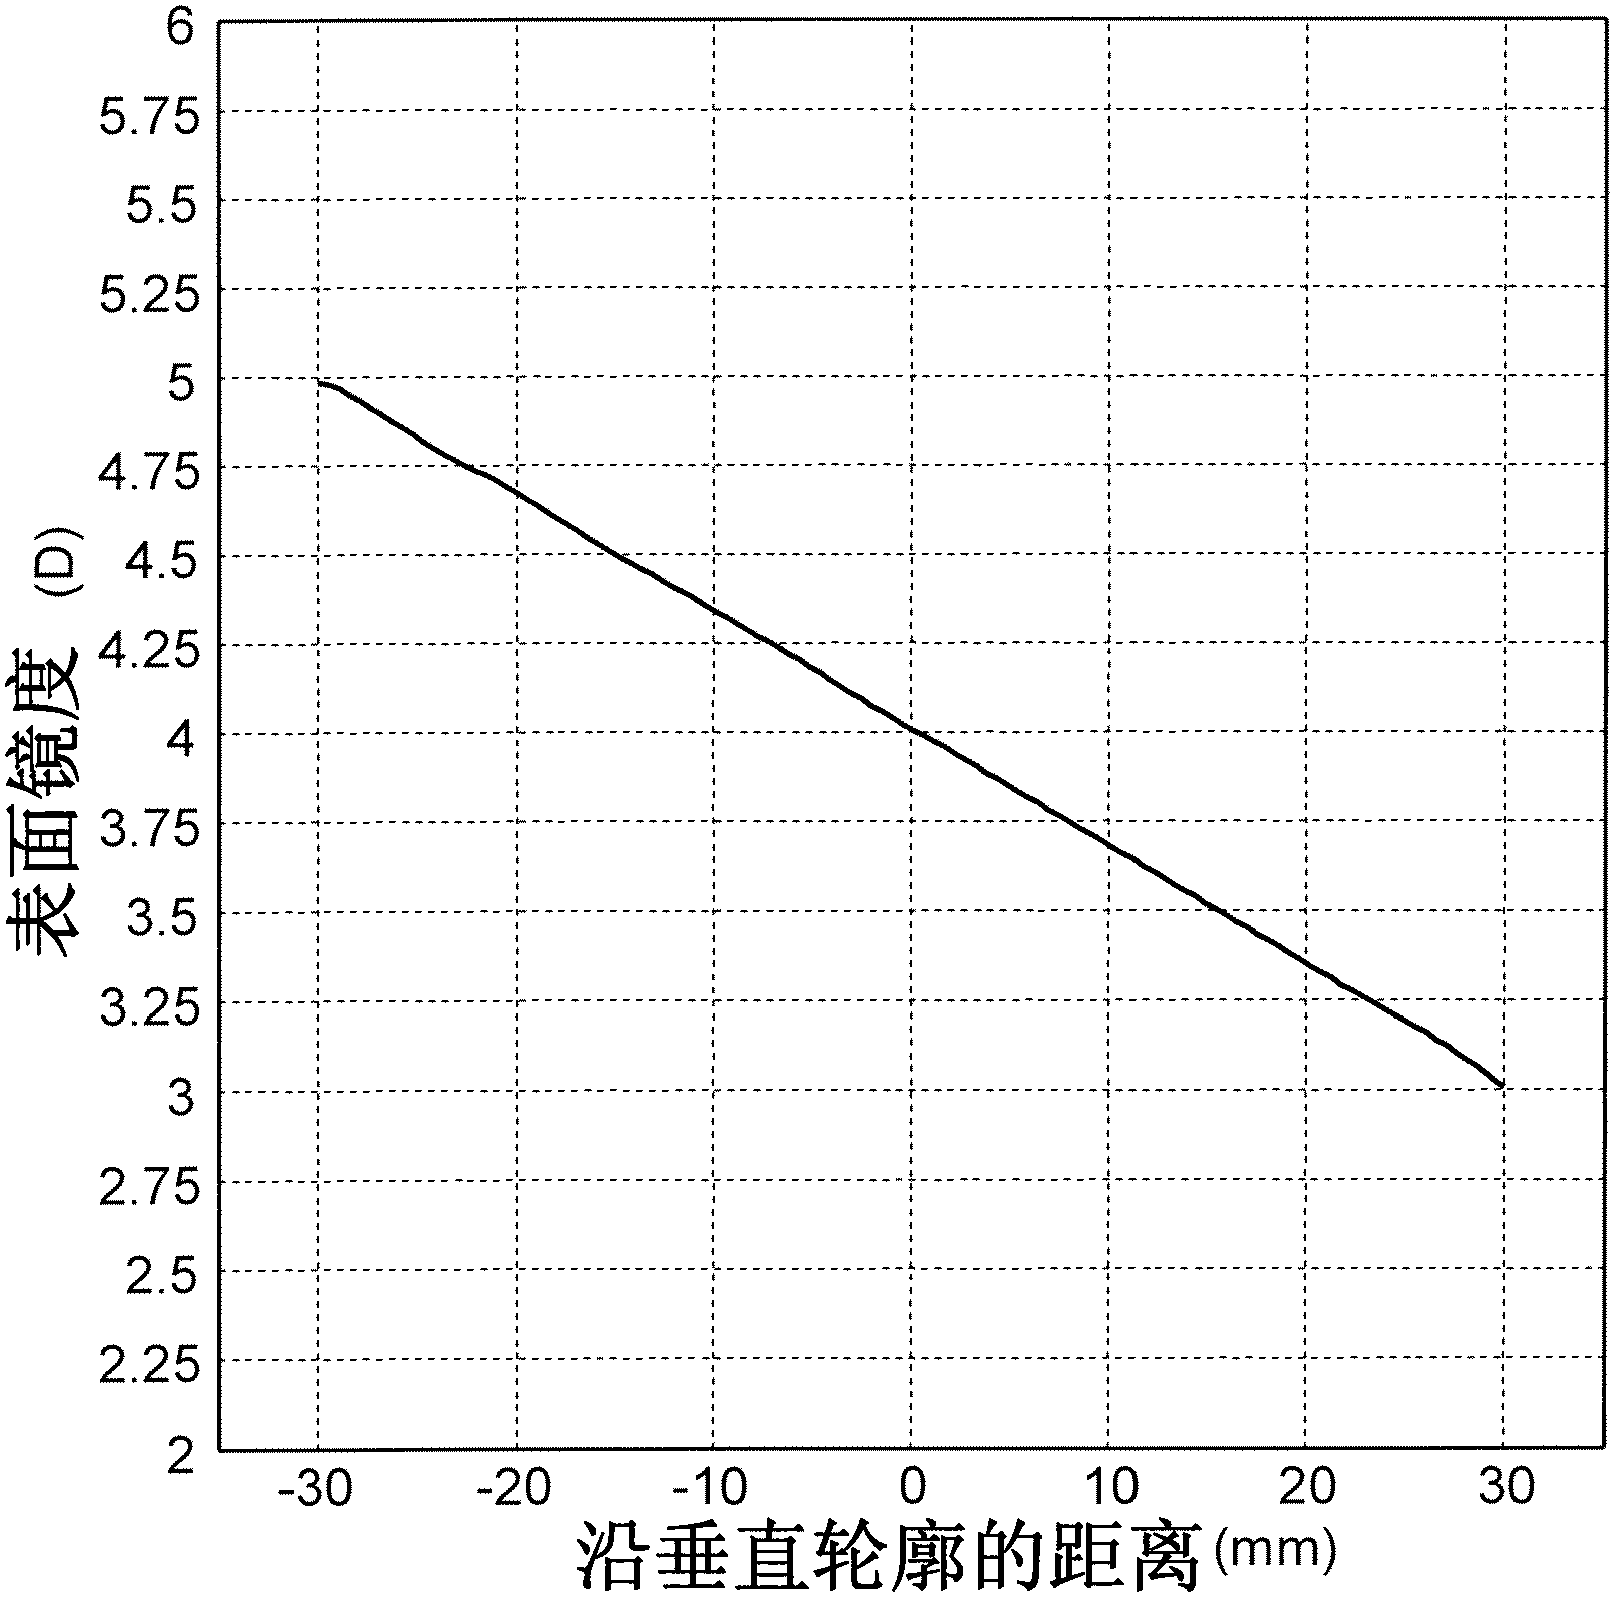 Lens with continuous power gradation